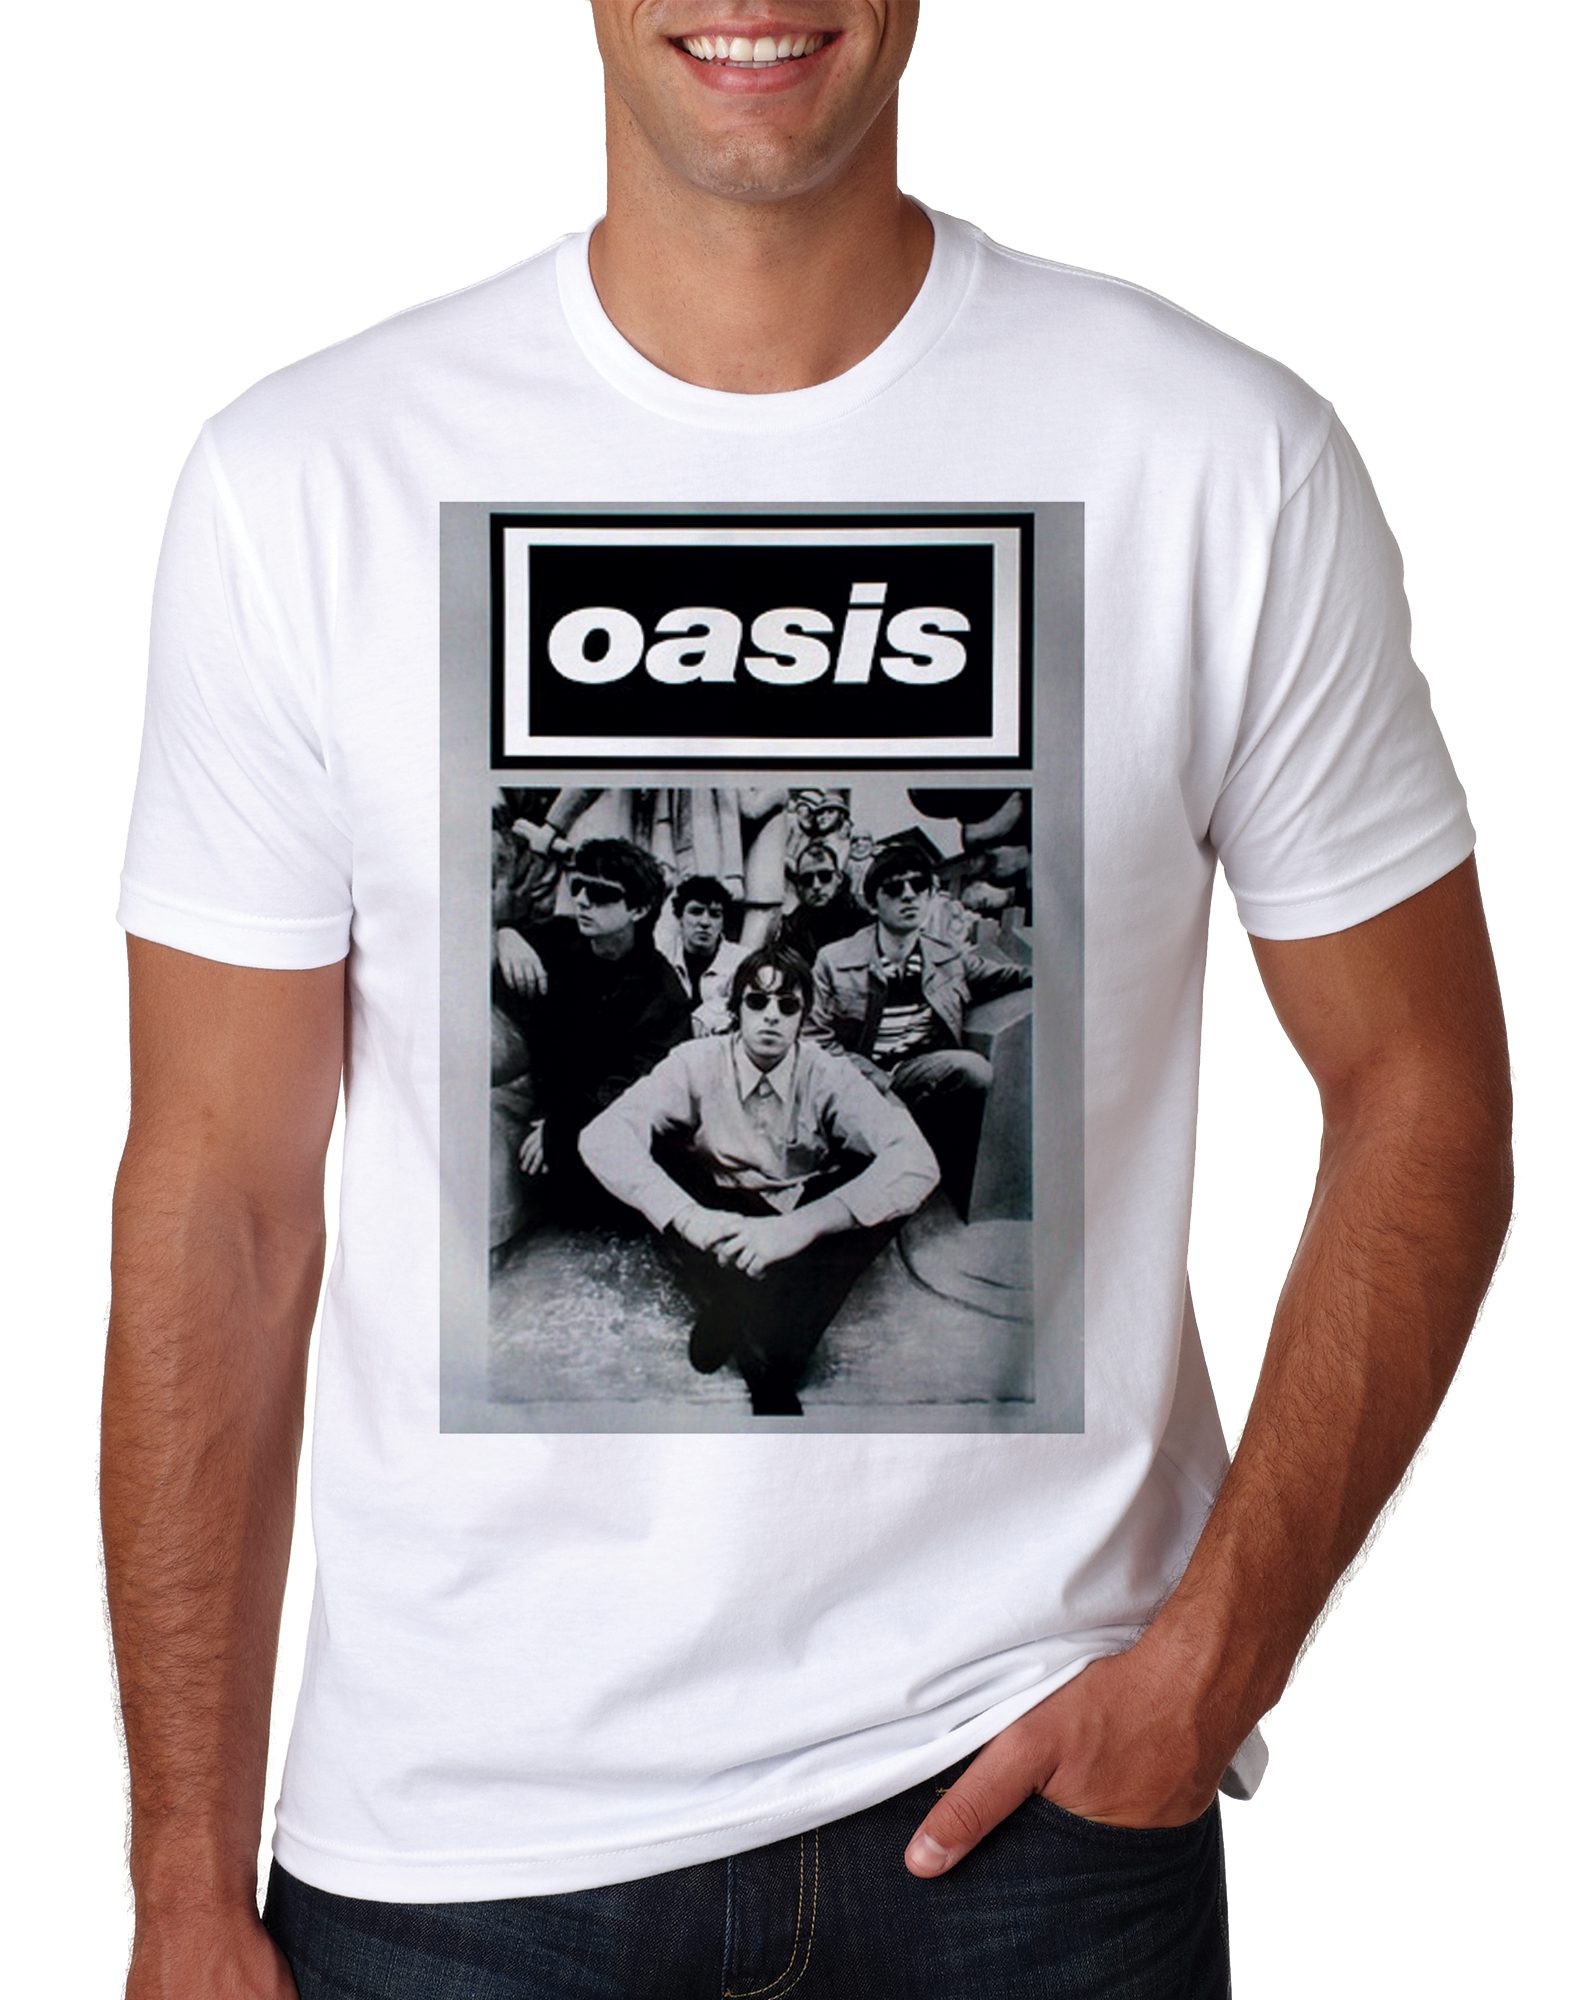 Intervenere Snuble justering Oasis T Shirt Liam Gallagher Supersonic Retro Band - Lucky t-shirt Shop